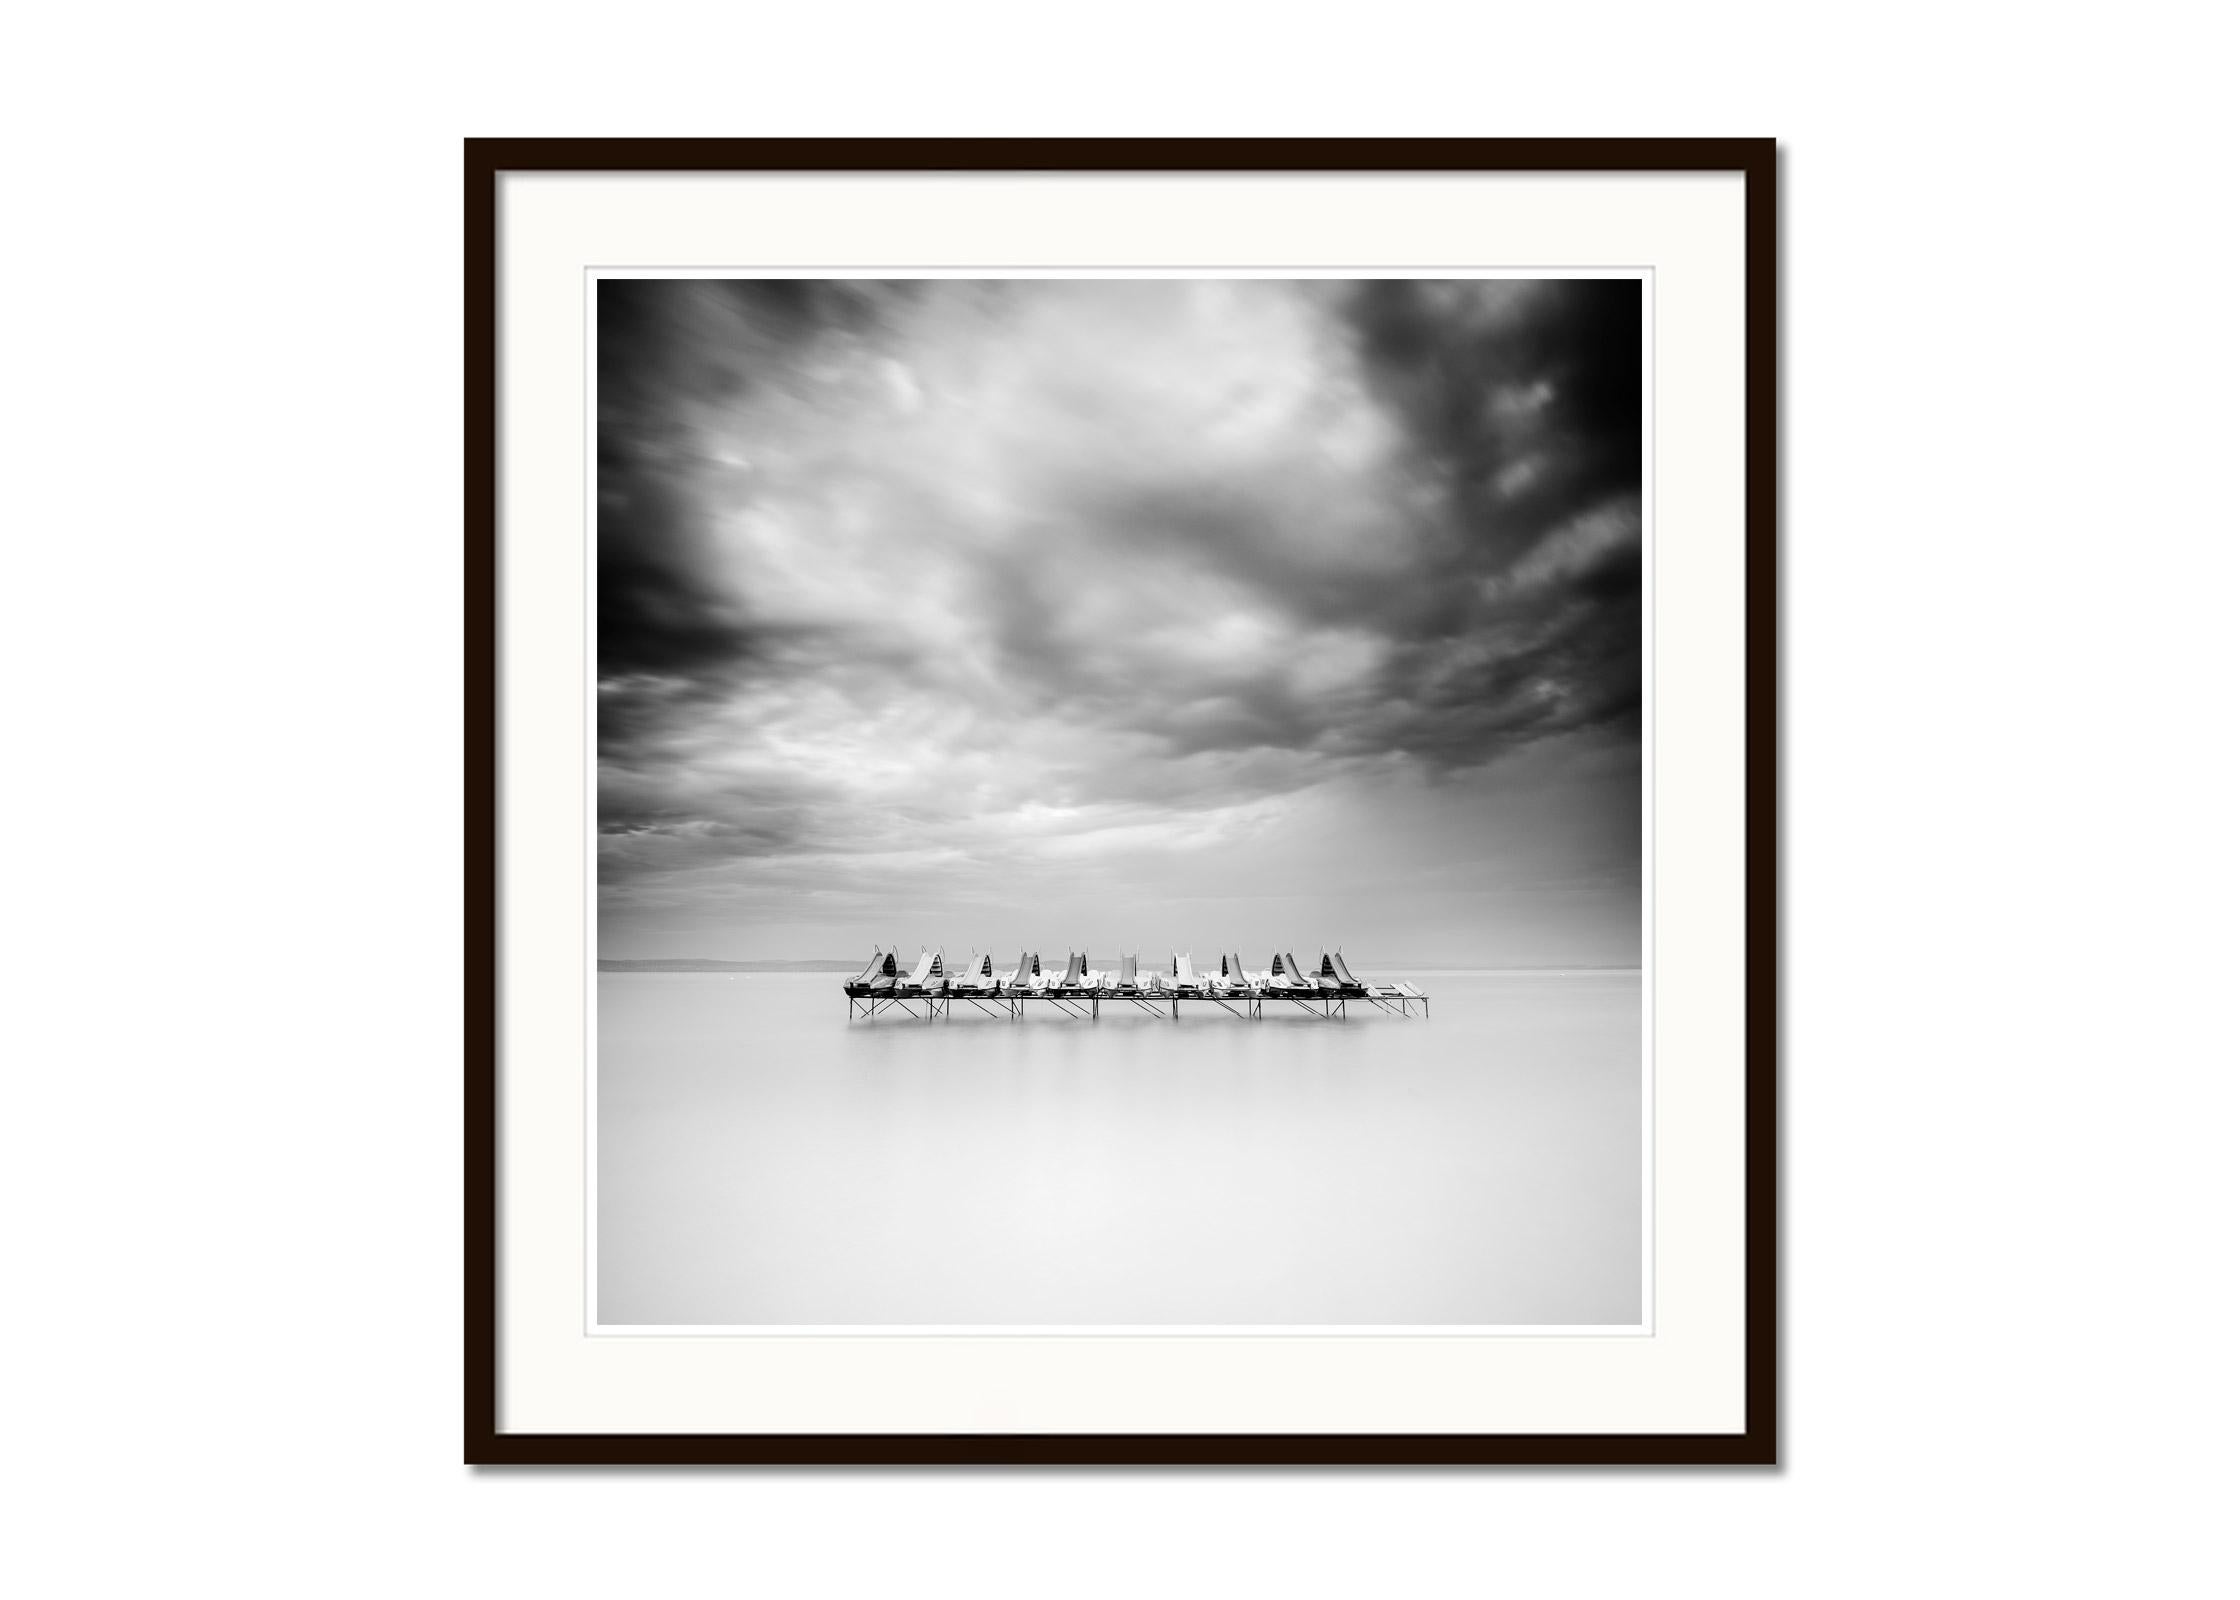 Black and white fine art long exposure waterscape - landscape photography. Archival pigment ink print, edition of 7. Signed, titled, dated and numbered by artist. Certificate of authenticity included. Printed with 4cm white border. International